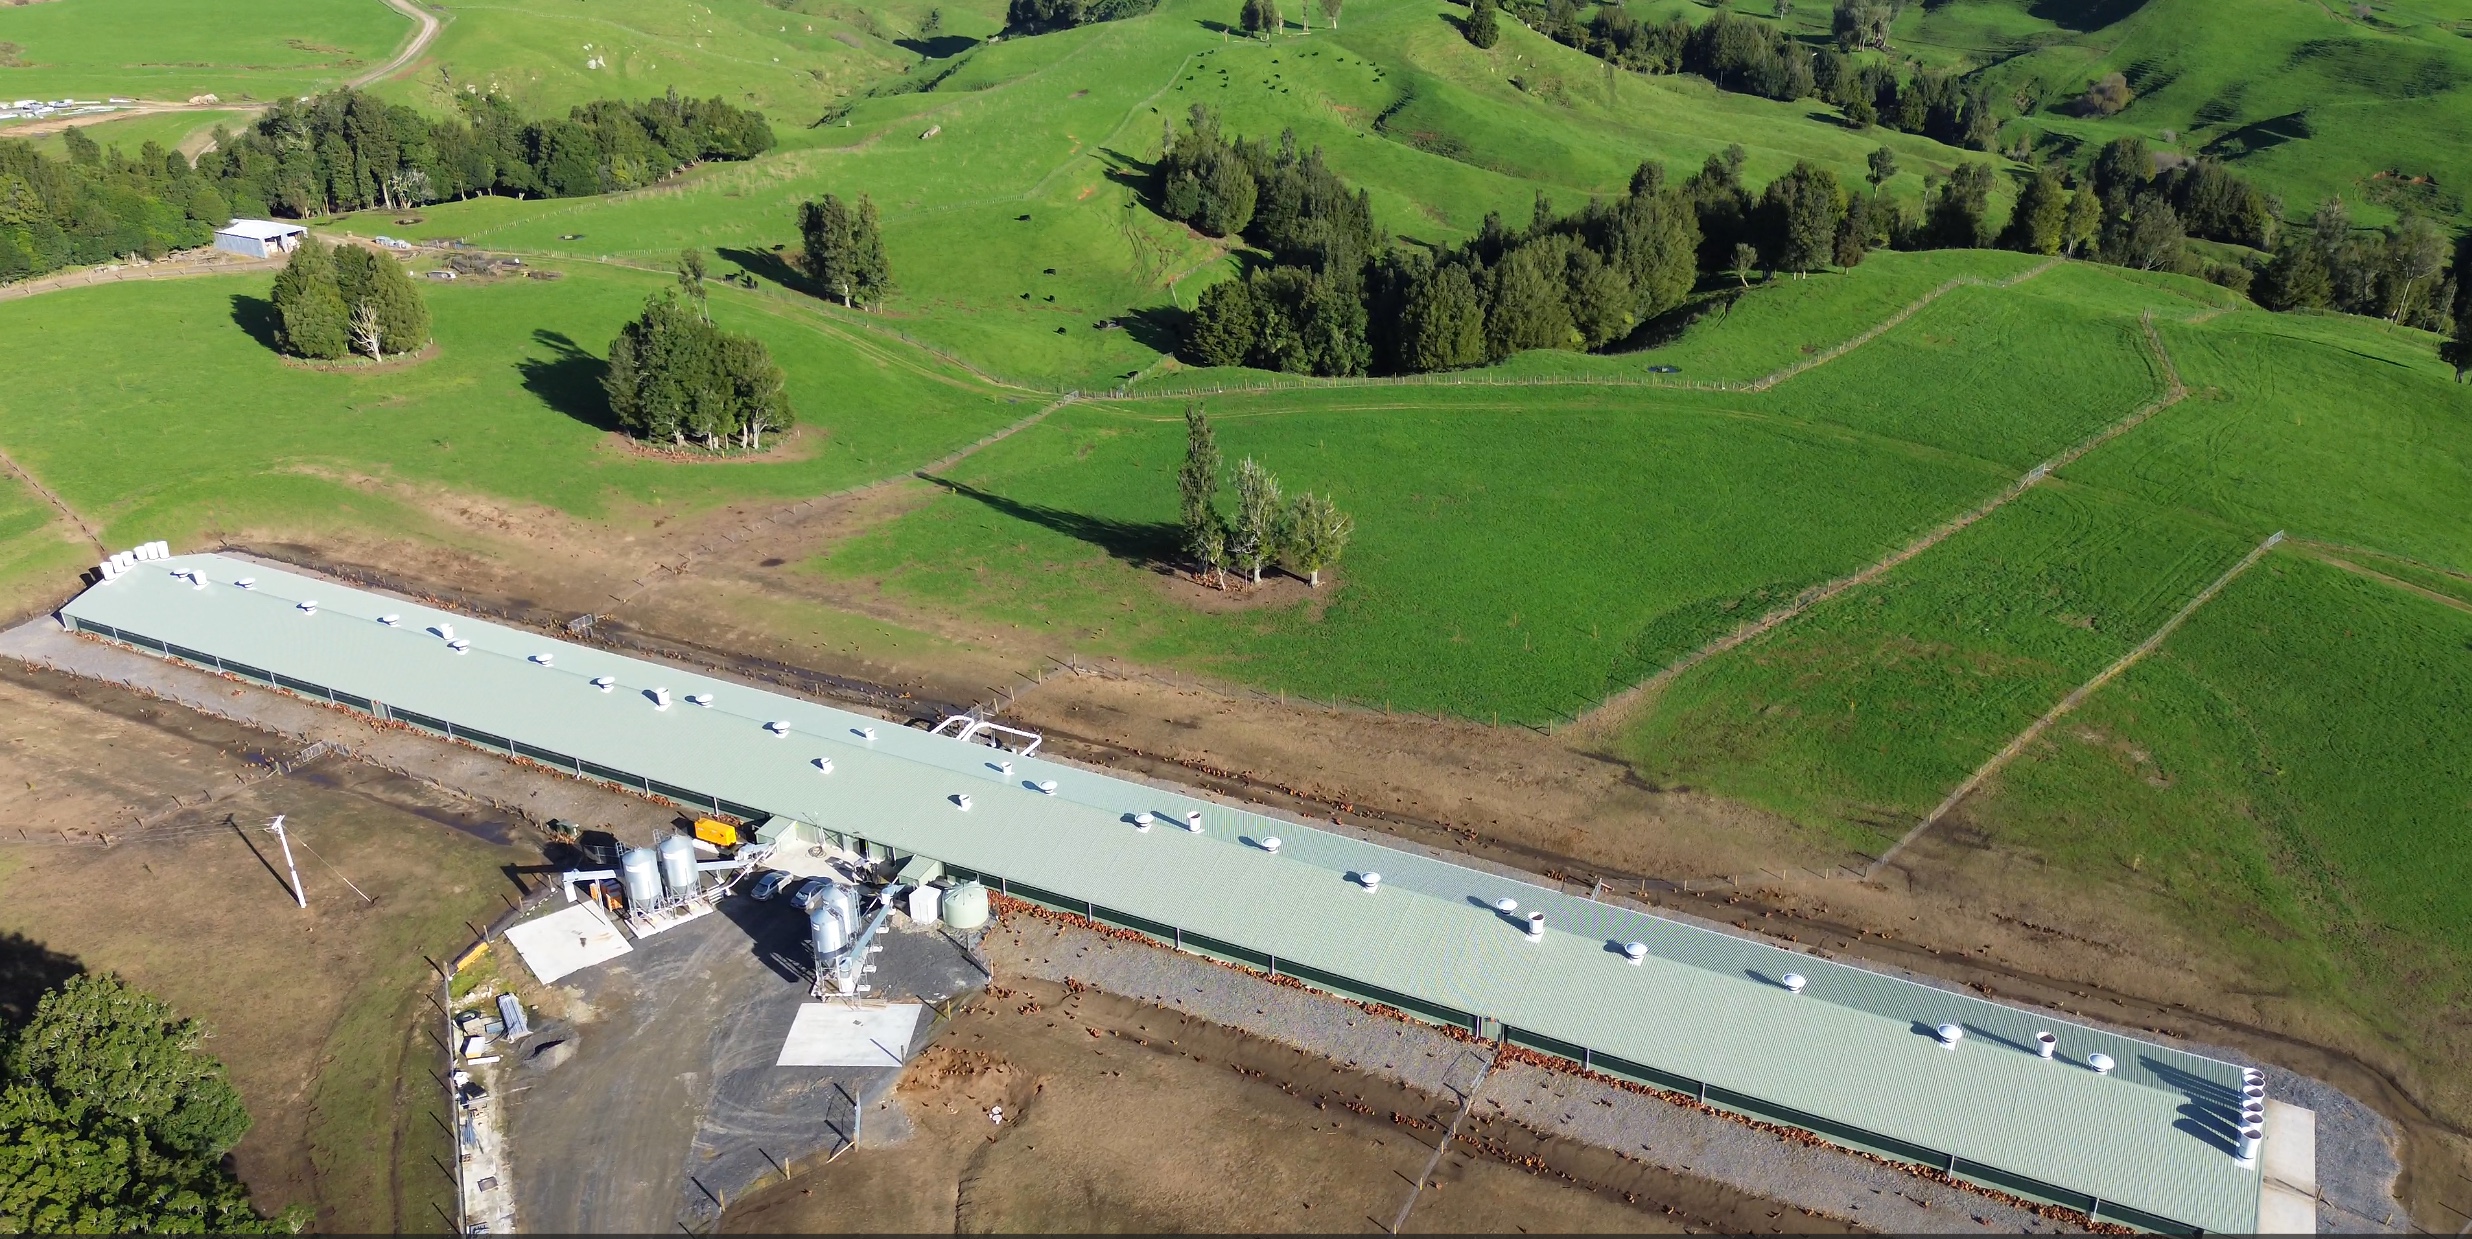 New Zealand poultry shed design and construction